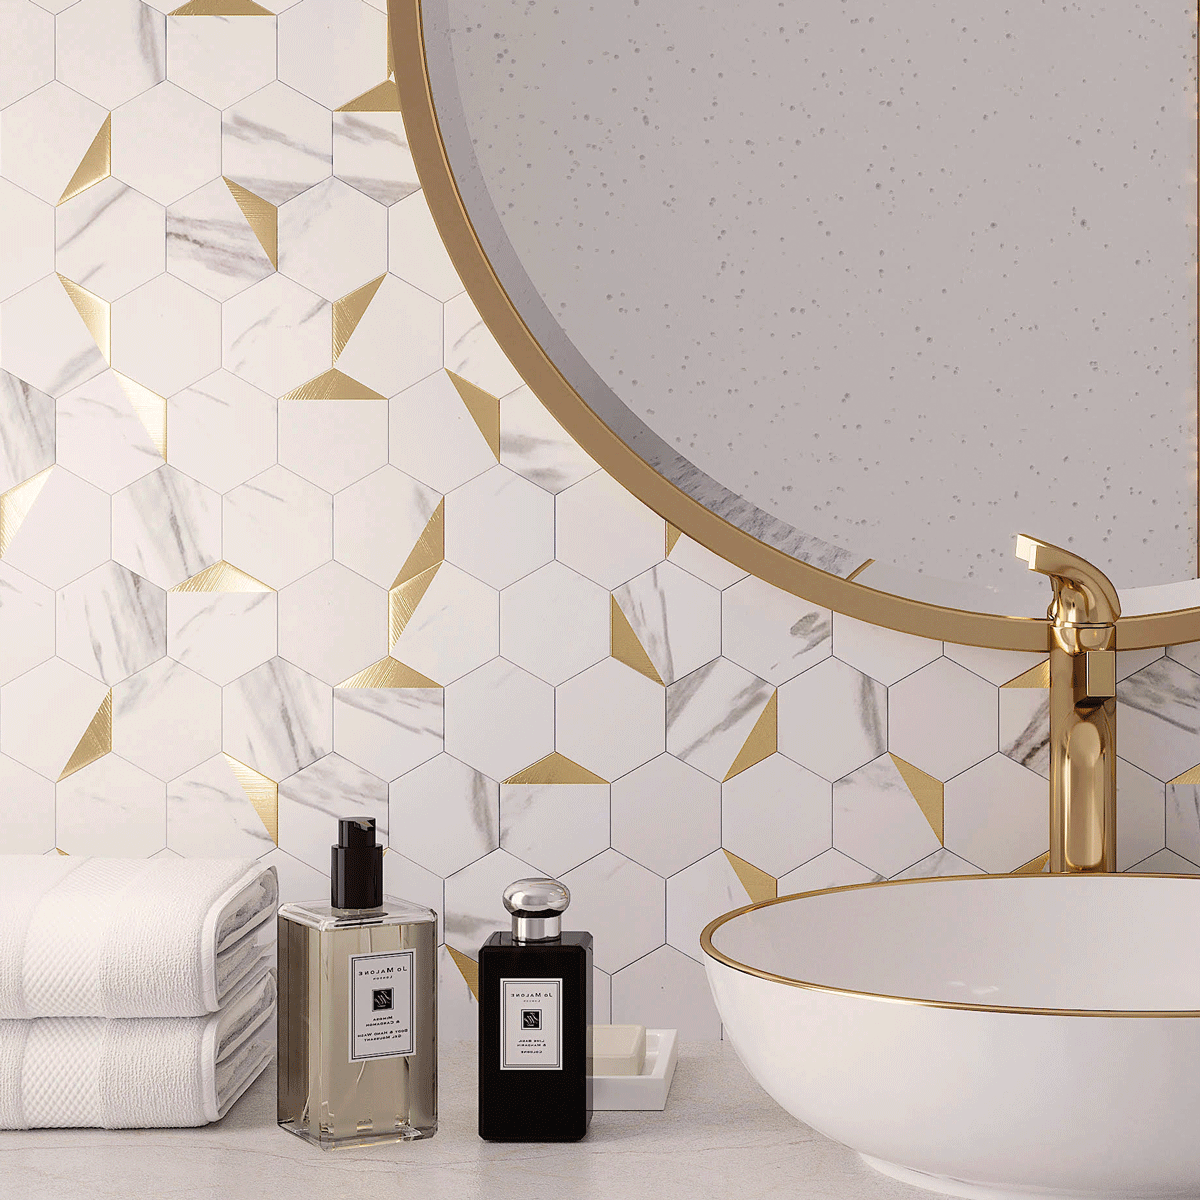 Vinyl Adhesive tile with marbled patterns and brushed gold details